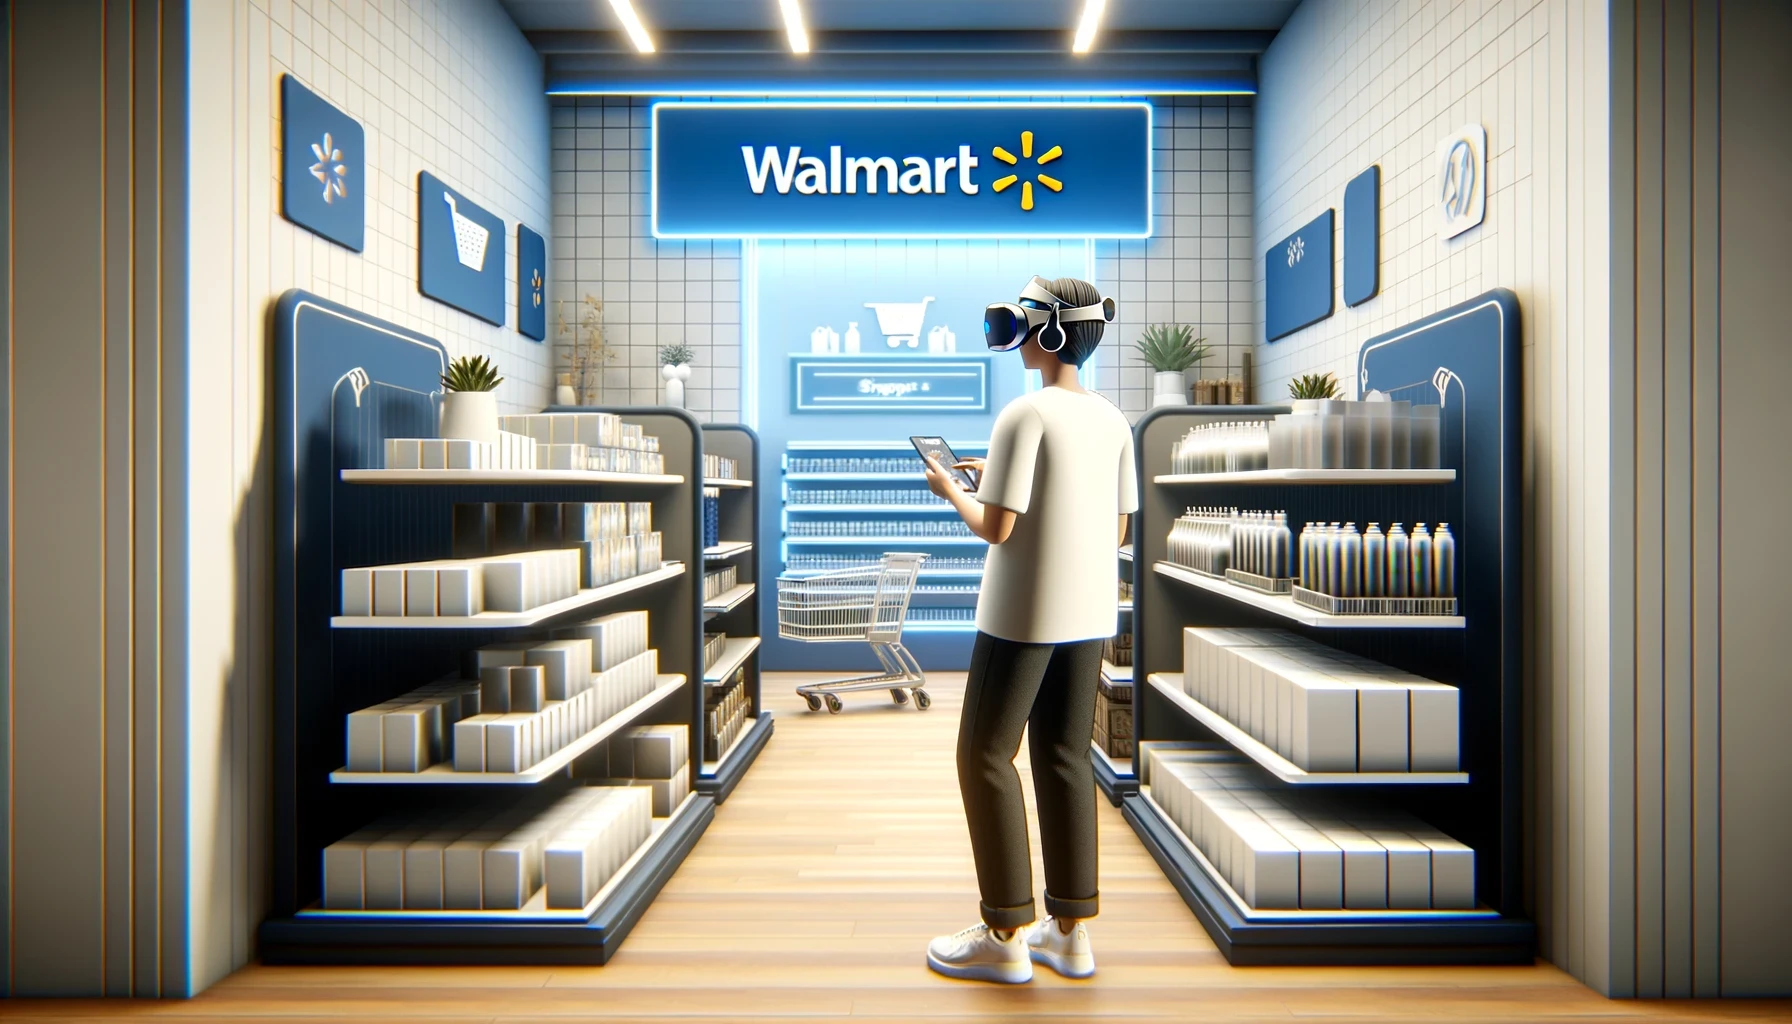 DALL·E 2024 06 06 18.05.04 A more realistic scene showing a virtual reality headset user navigating through a virtual Walmart store in the metaverse. Digital shelves are stocked